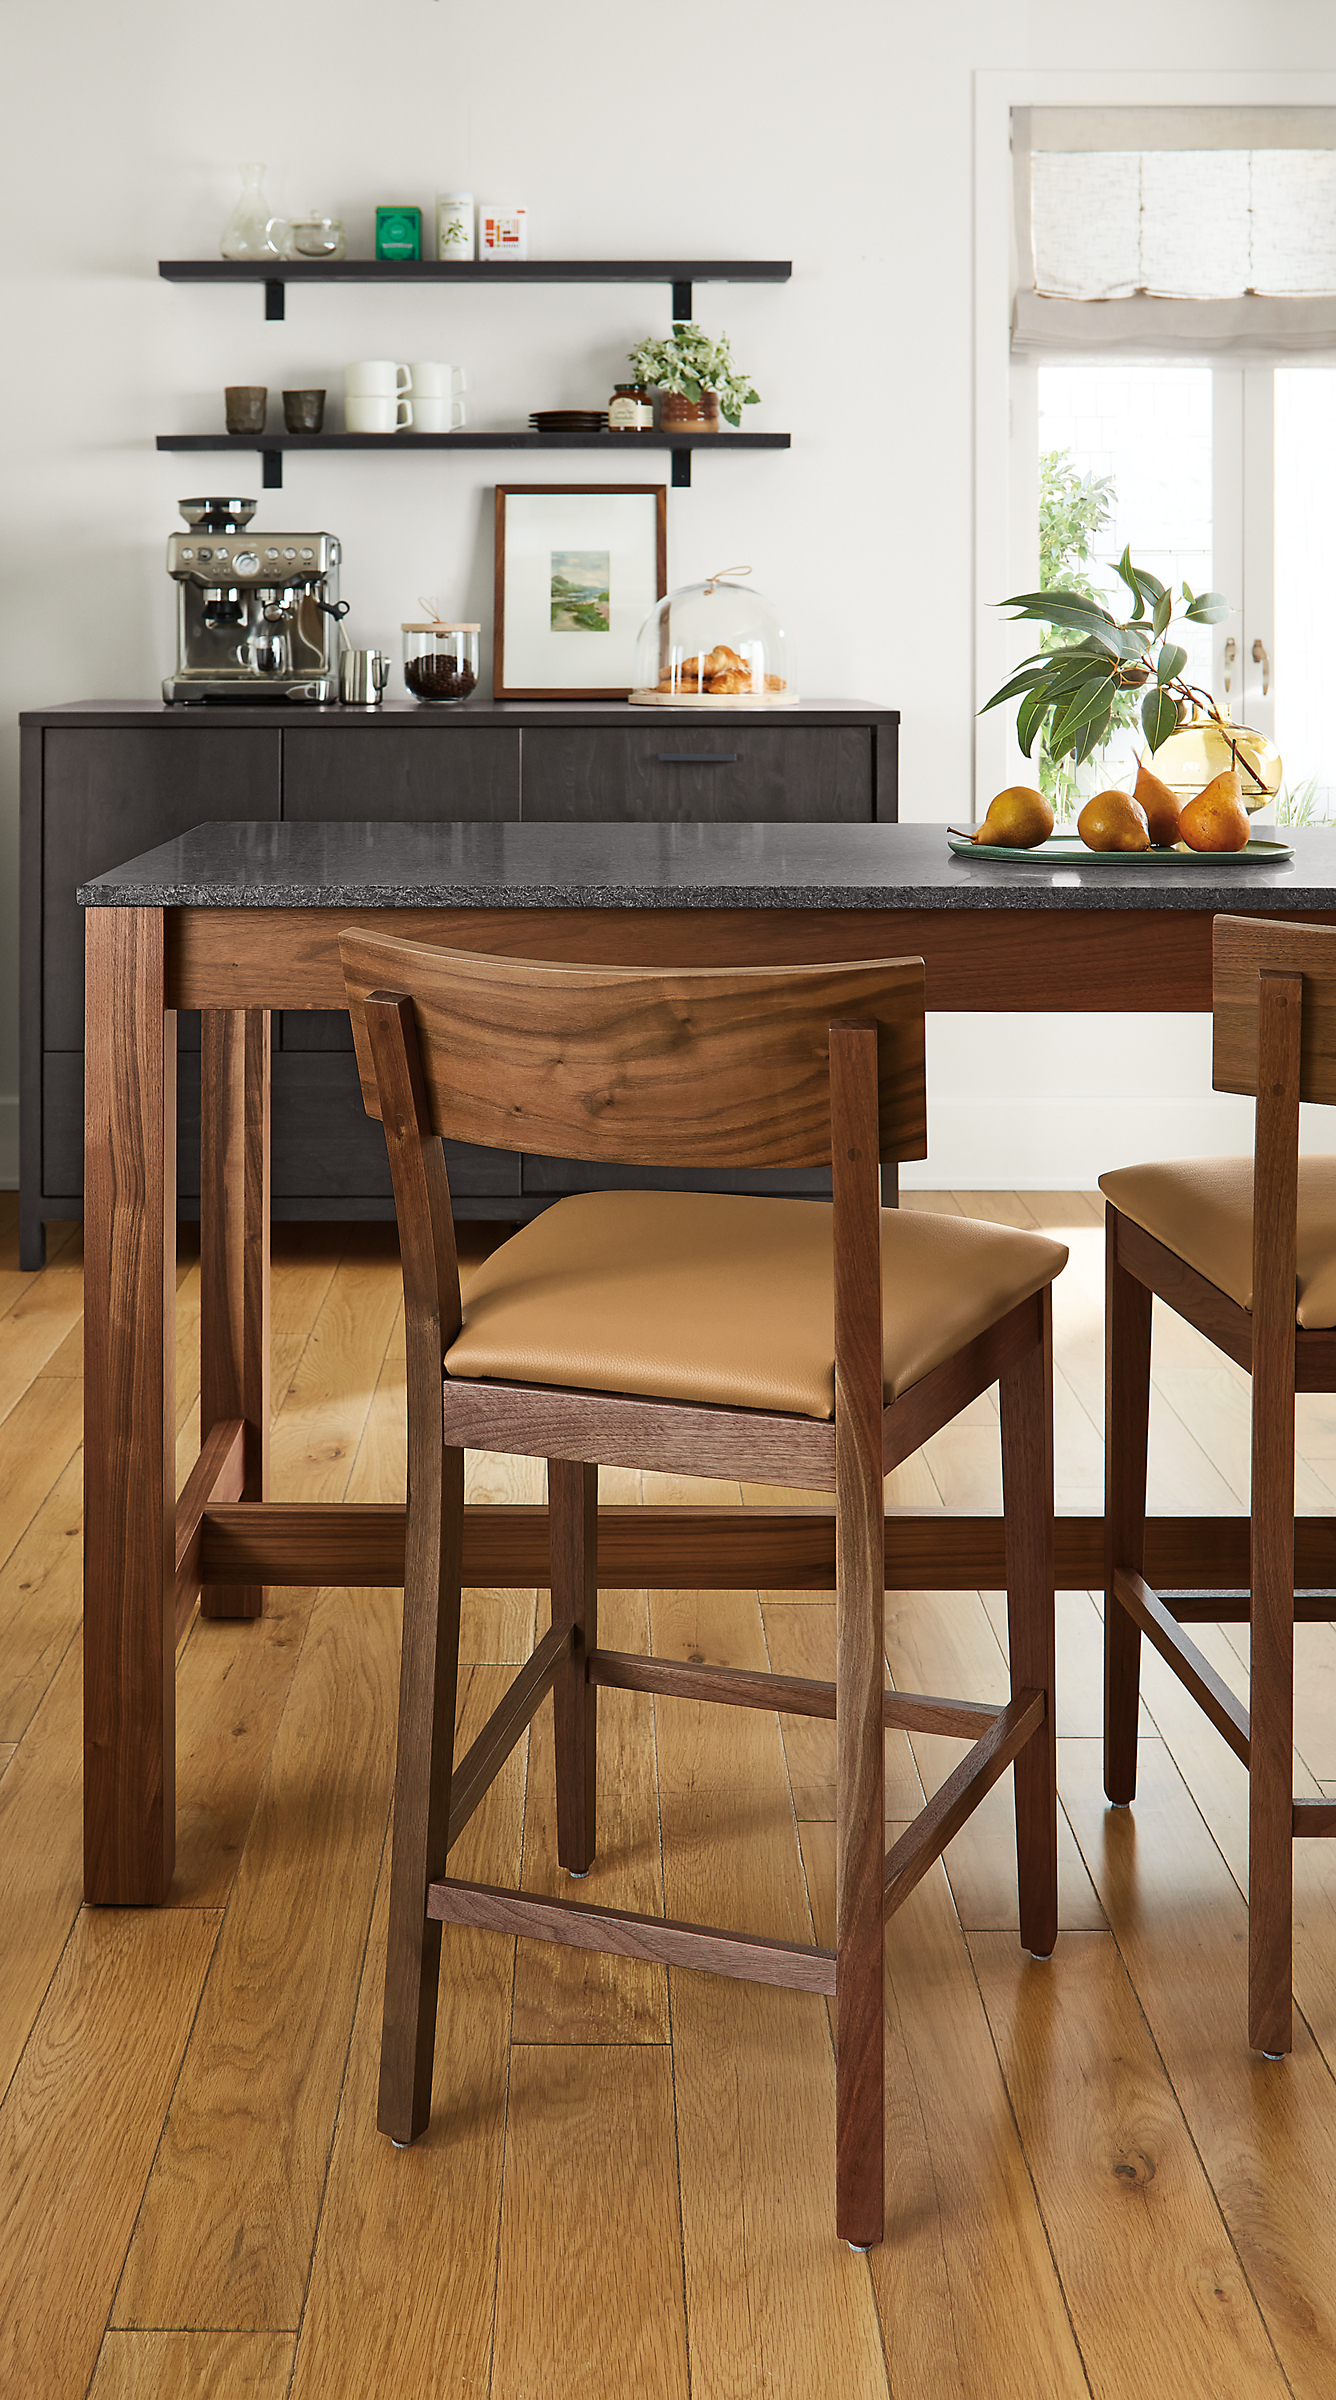 dining area with doyle counter stools in walnut and leather, linden counter table and emerson fridge cabinet.